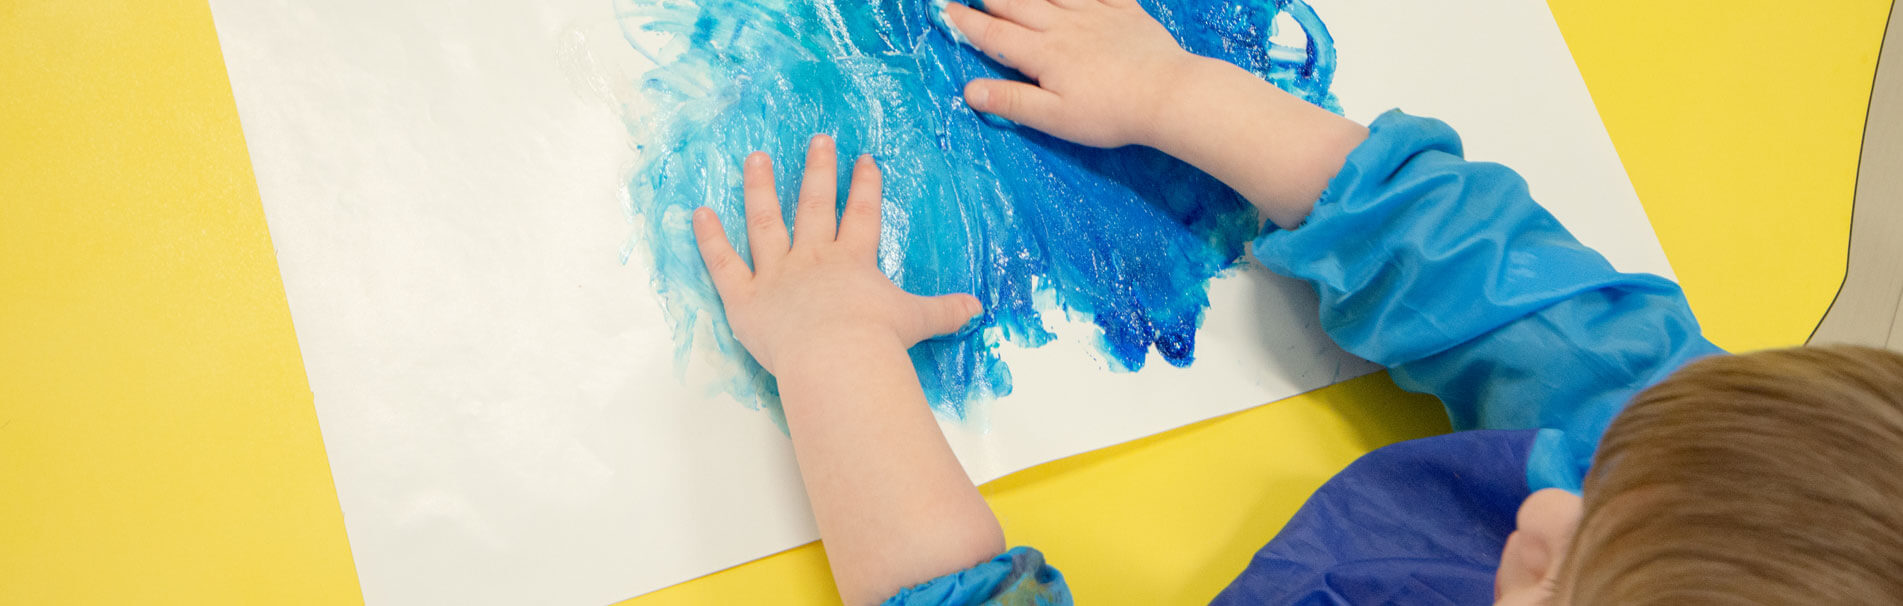 Child Painting With Hands